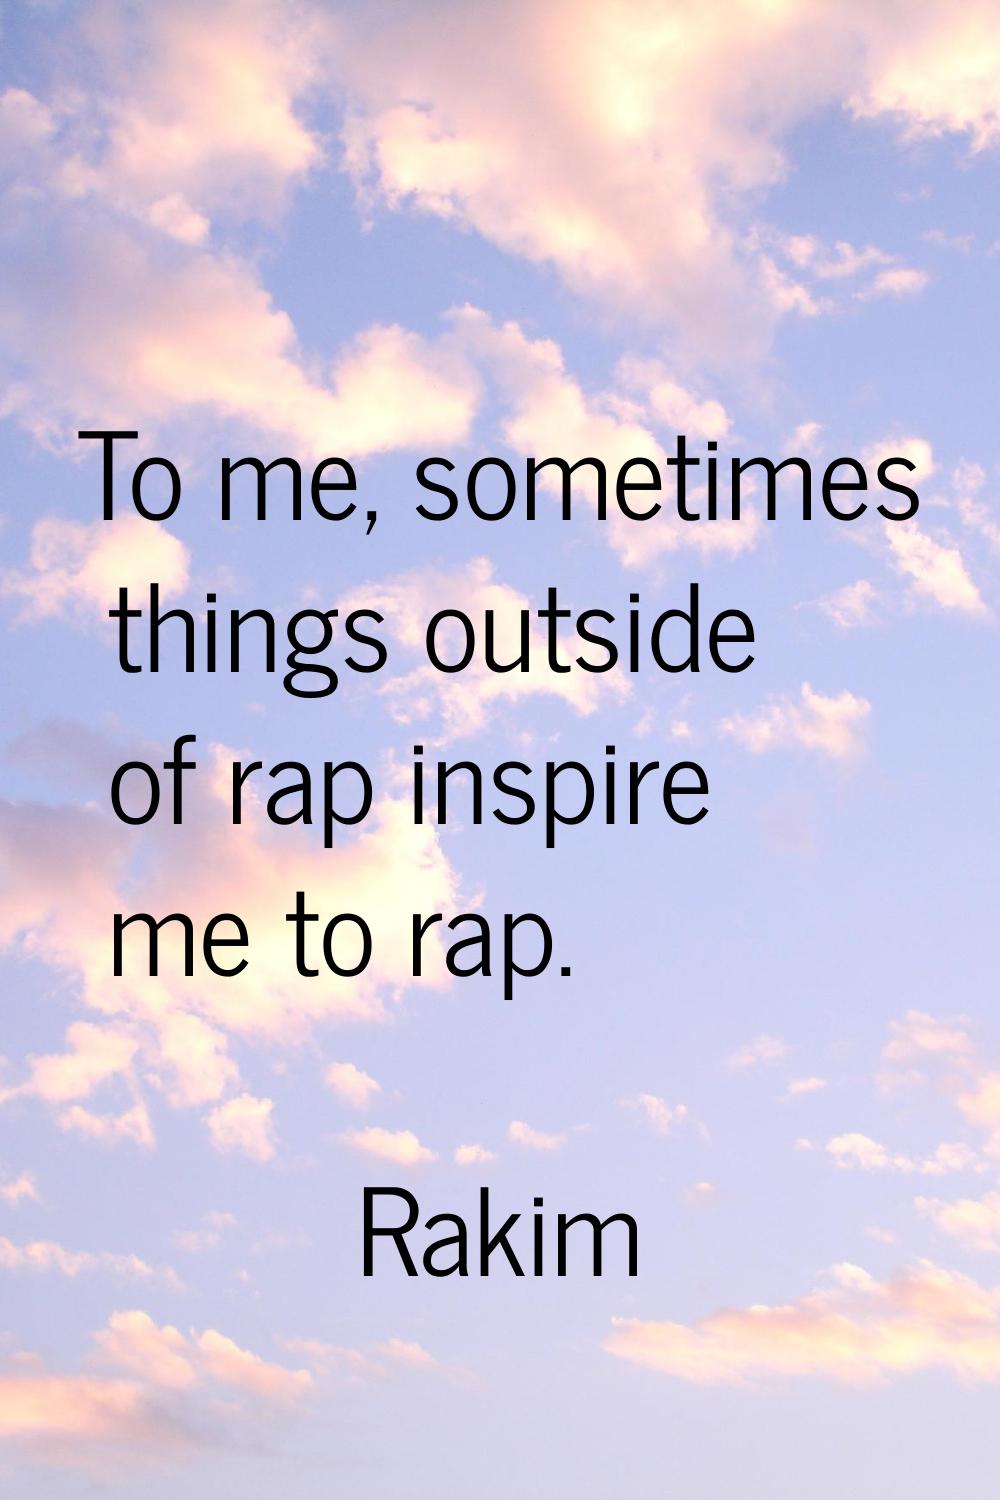 To me, sometimes things outside of rap inspire me to rap.